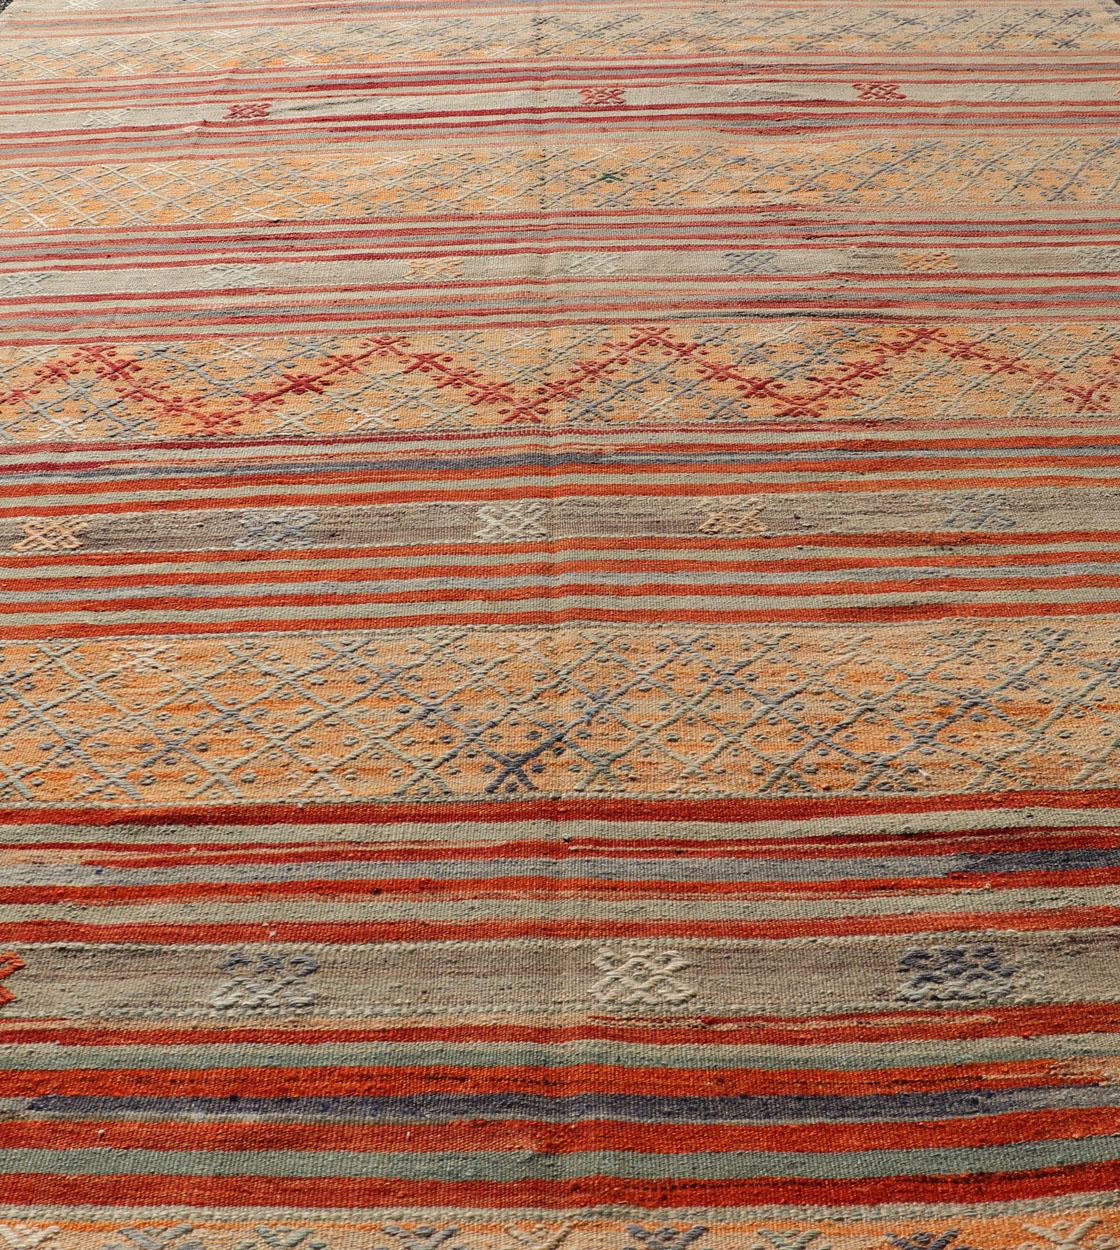 Colorful Vintage Turkish Embroidered Kilim with Stripes and Geometric Motifs  For Sale 3